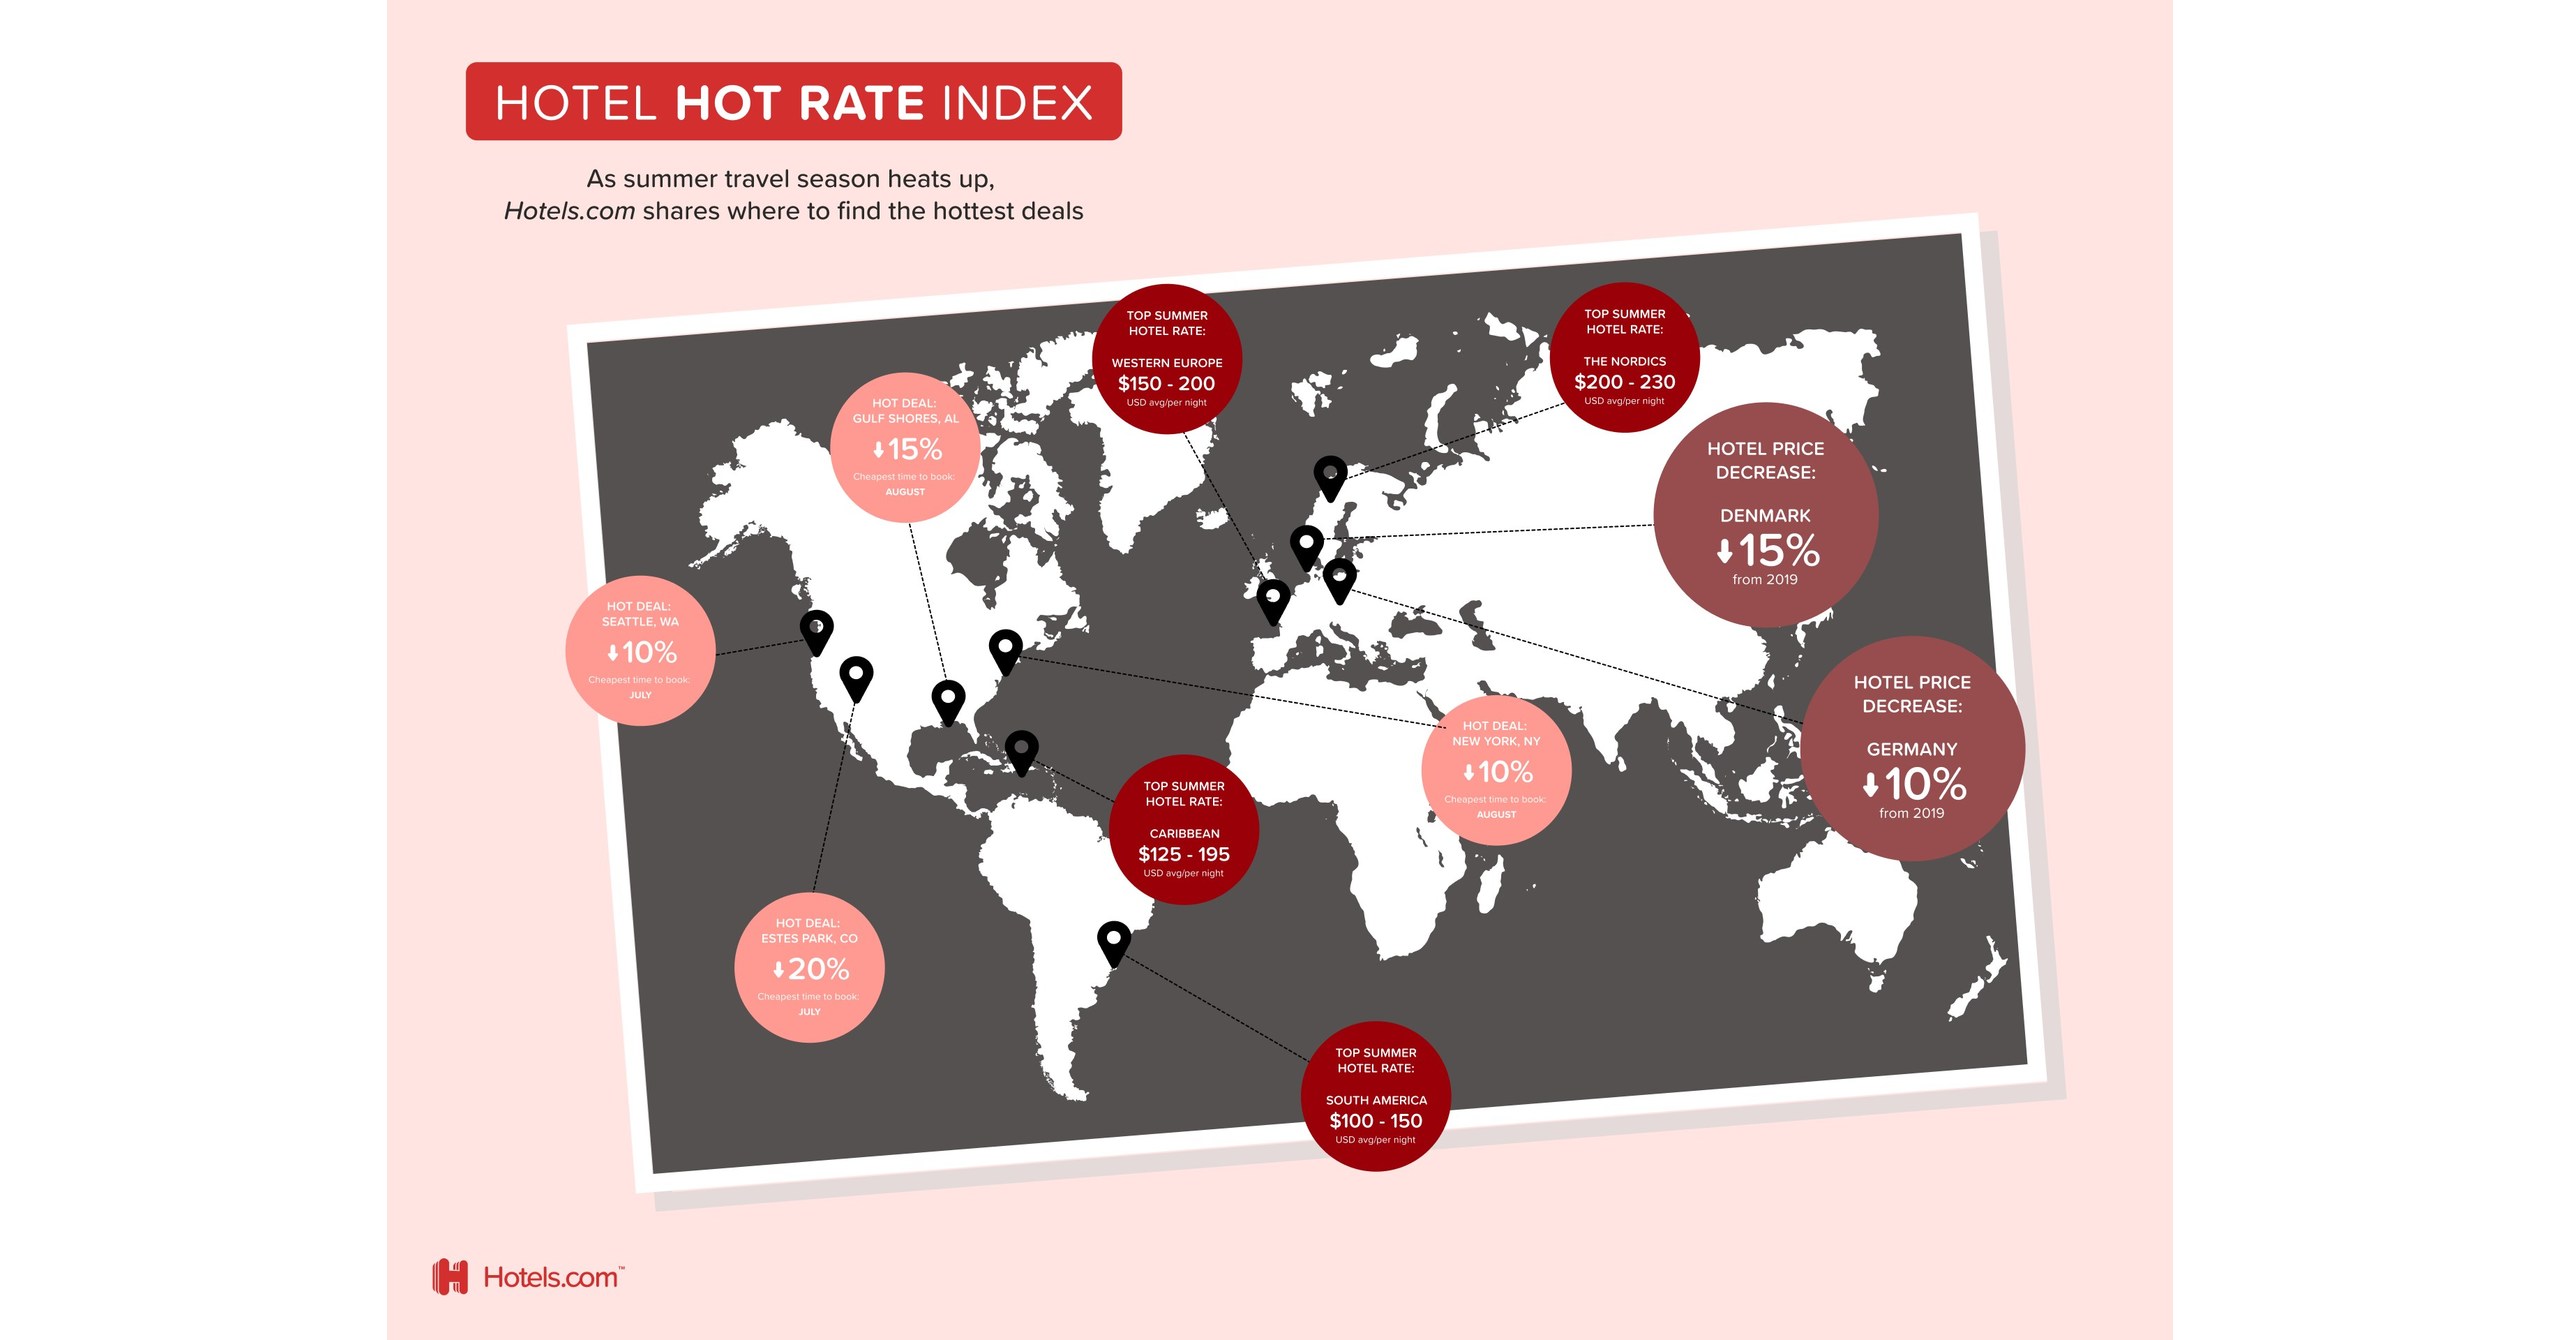 New Hotels.com pricing index reveals when and where to score best hotel rates this summer